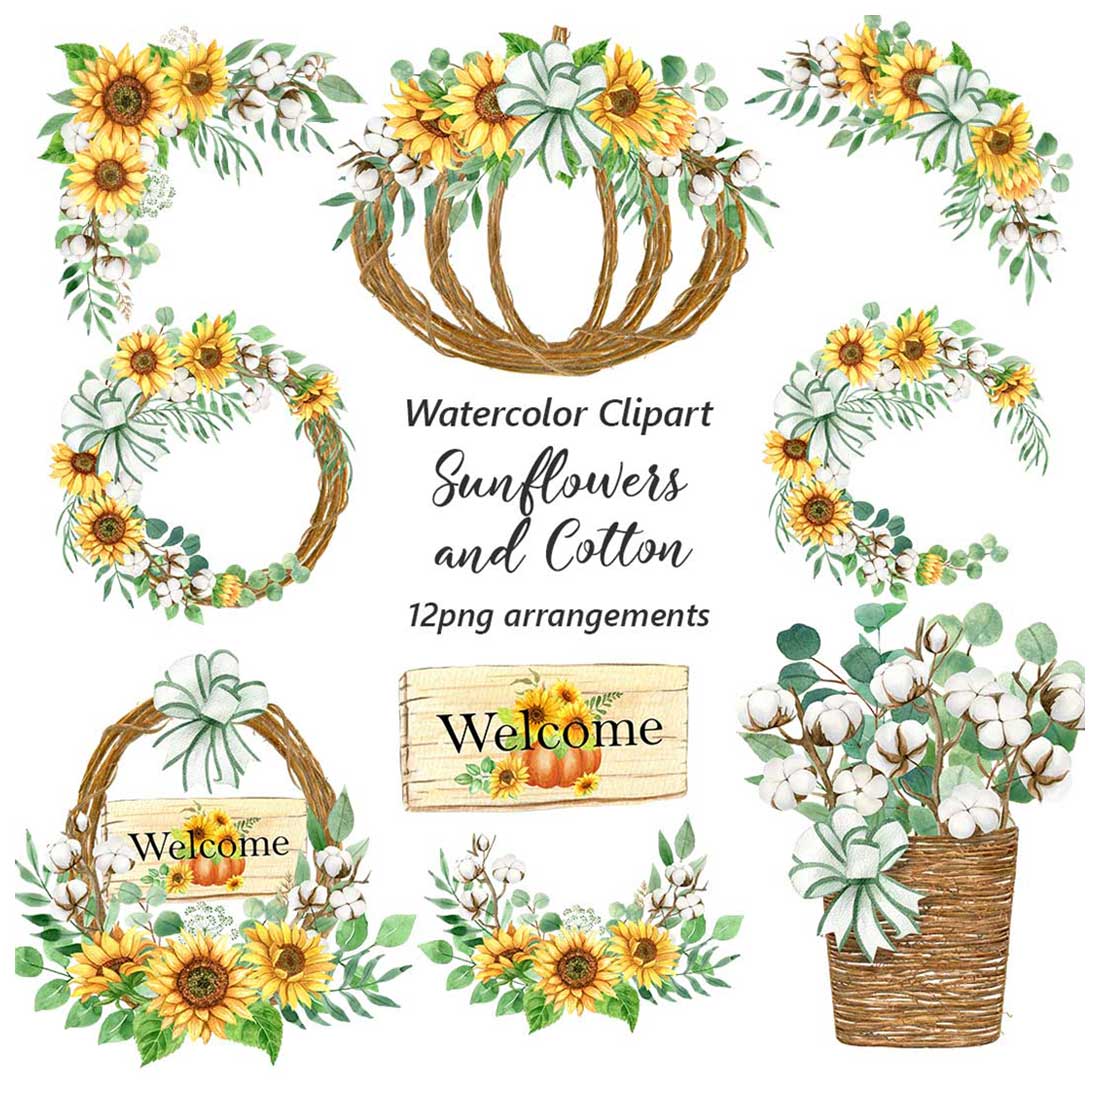 Watercolor Sunflower and Cotton Clipart cover image.